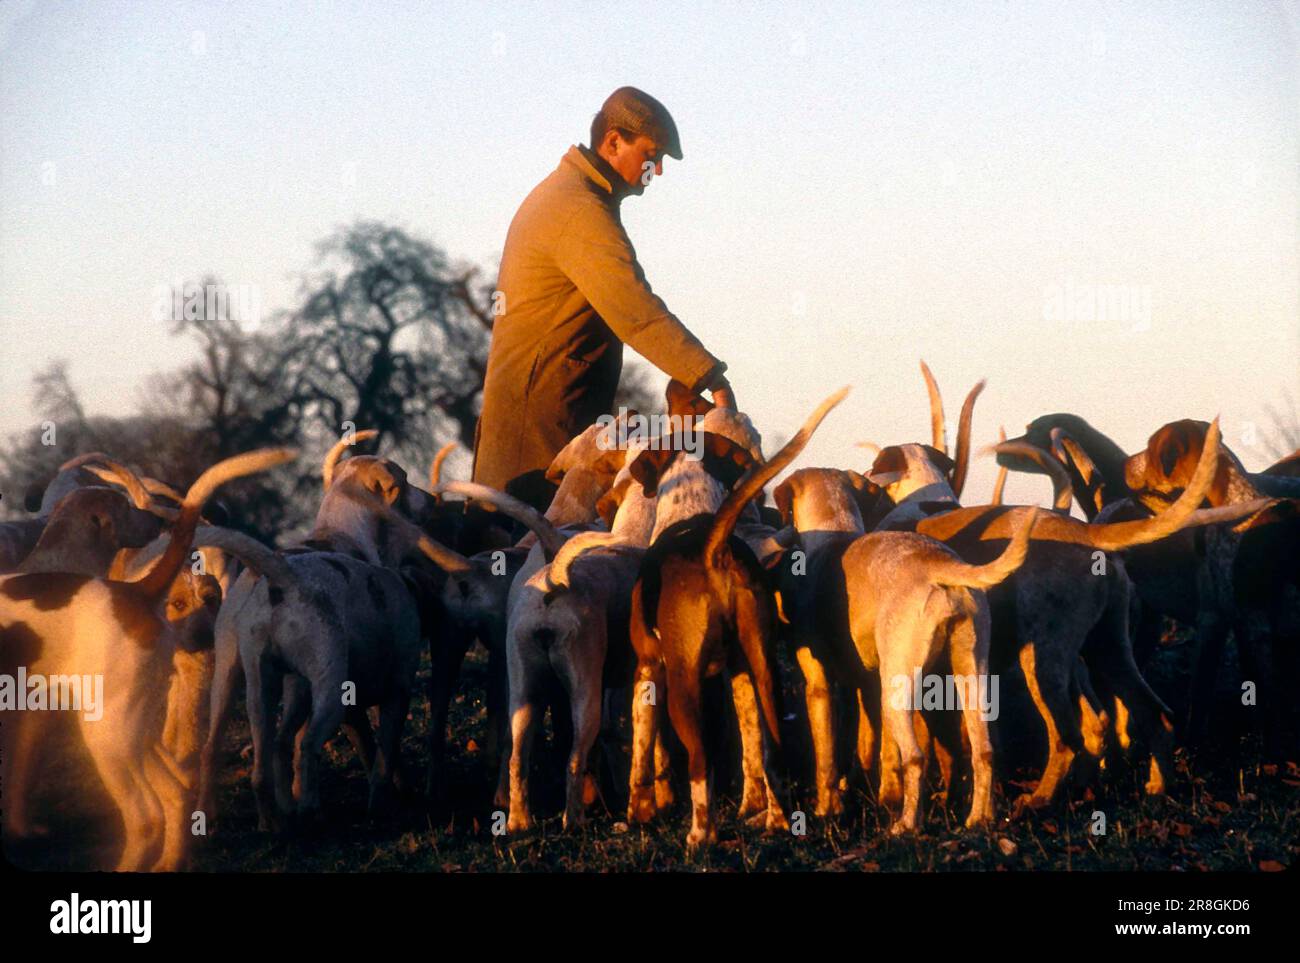 Fox hunting, the Duke of Beaufort hunt.  Morning hound exercise in parkland with huntsman Charles Wheeler who is first Whipper-in before a days hunting. Badminton, Gloucestershire, England circa November 1996. 1990s UK HOMER SYKES Stock Photo